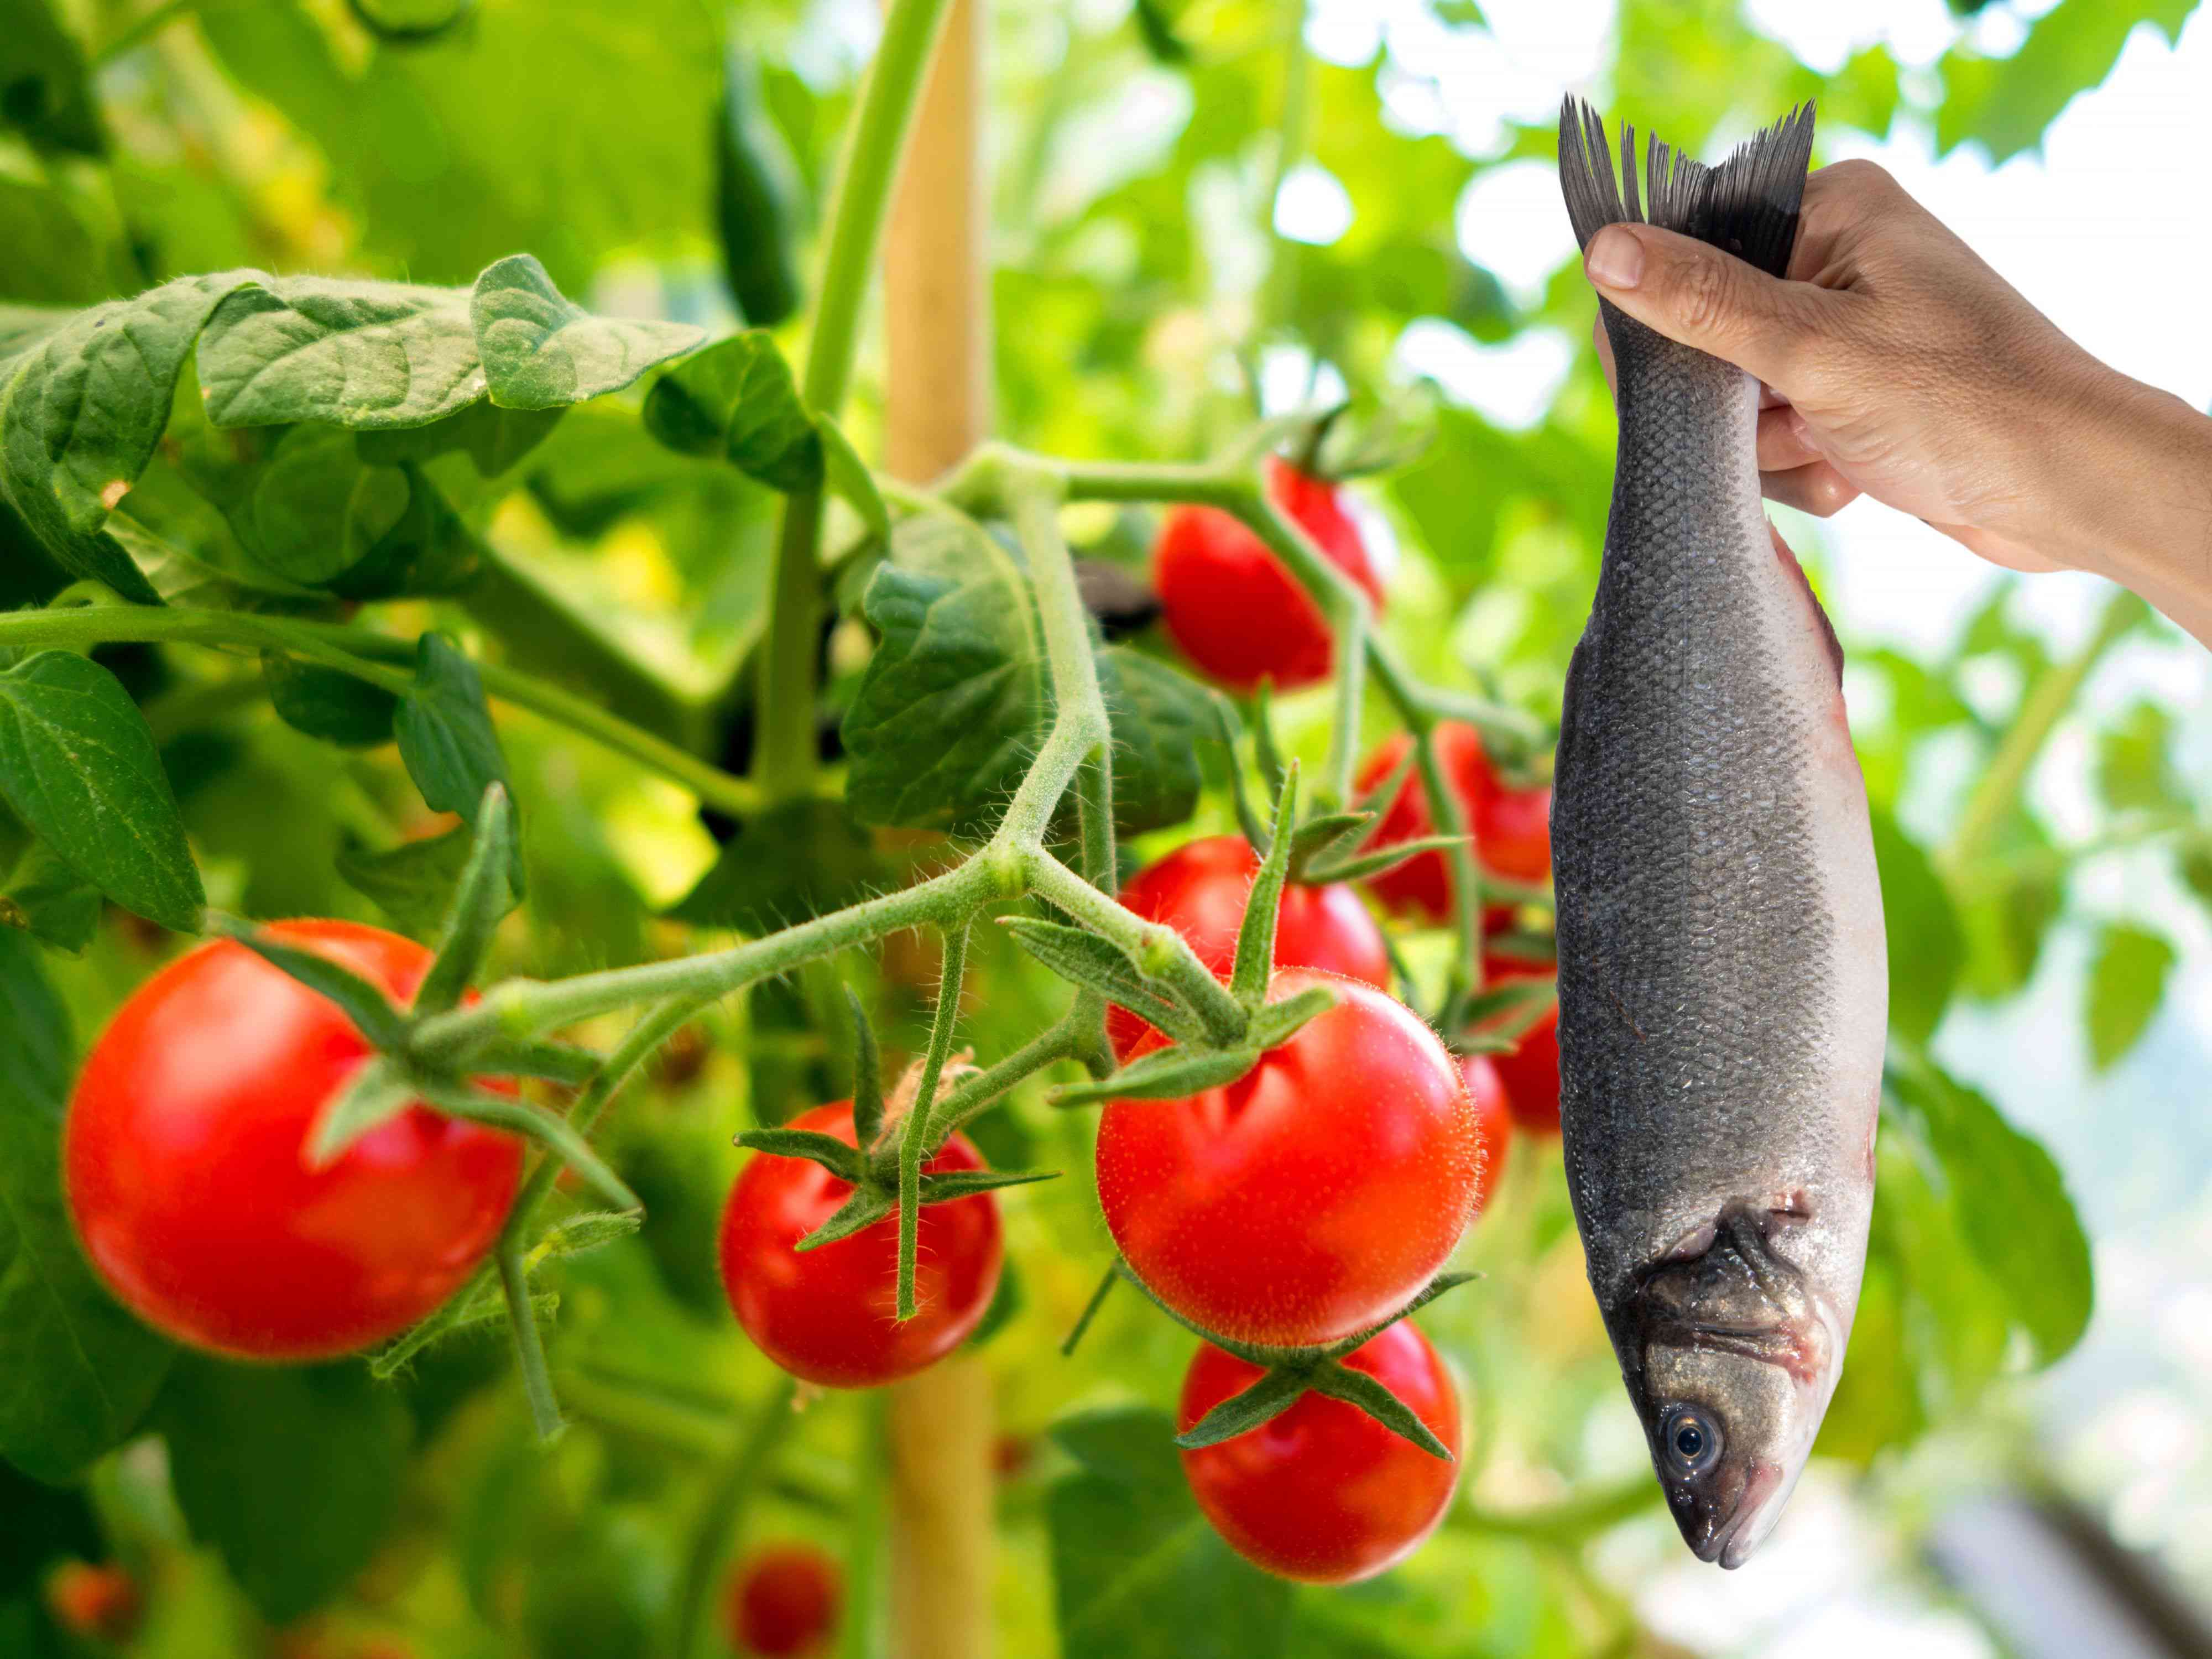 I Learned This Weird Tomato-Growing Hack From a Friend—And It’s Actually Genius